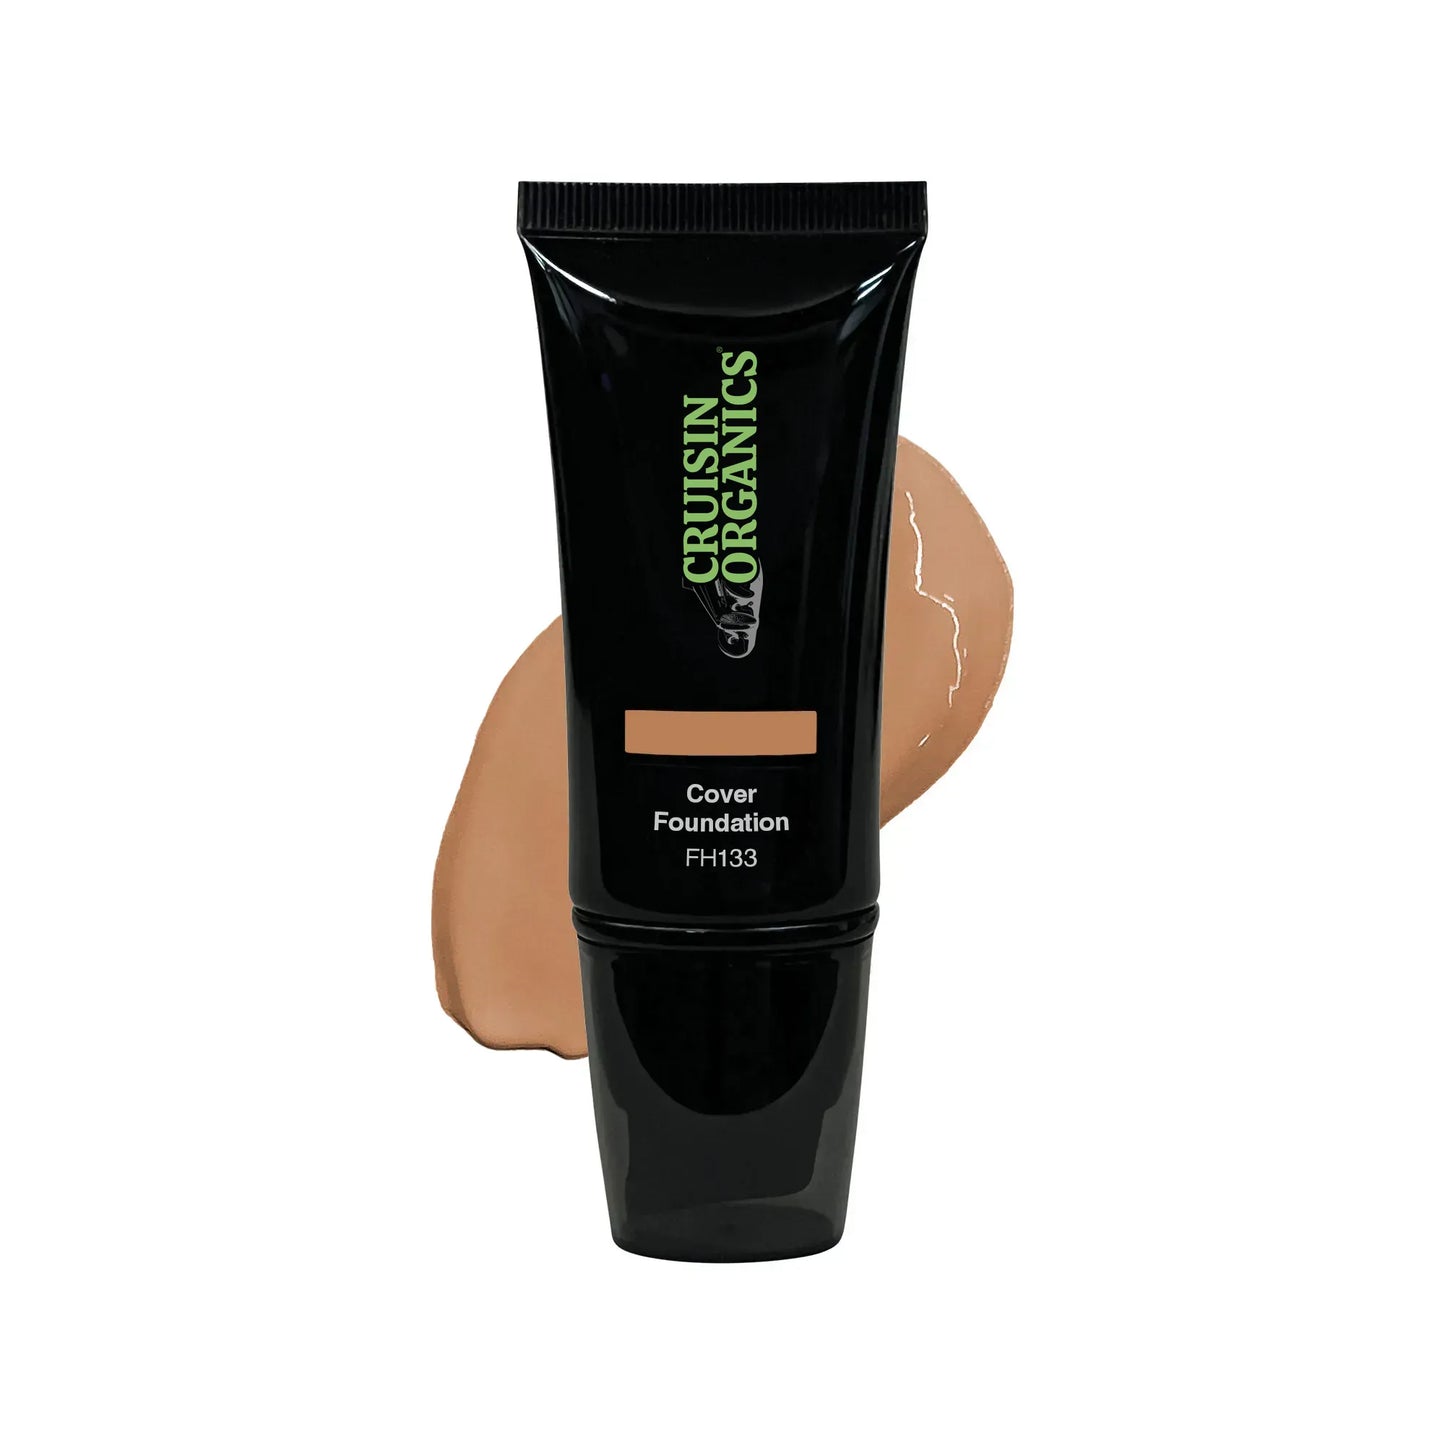 Cruisin Organics Dune Foundation. Dune Foundation matte finish while diffusing and minimizing pores. This cosmetic offers a transparent formula, providing enhanced skin clarity and a natural routine. Bye bye baby to visible pores and hello to a smooth, natural-looking complexion.